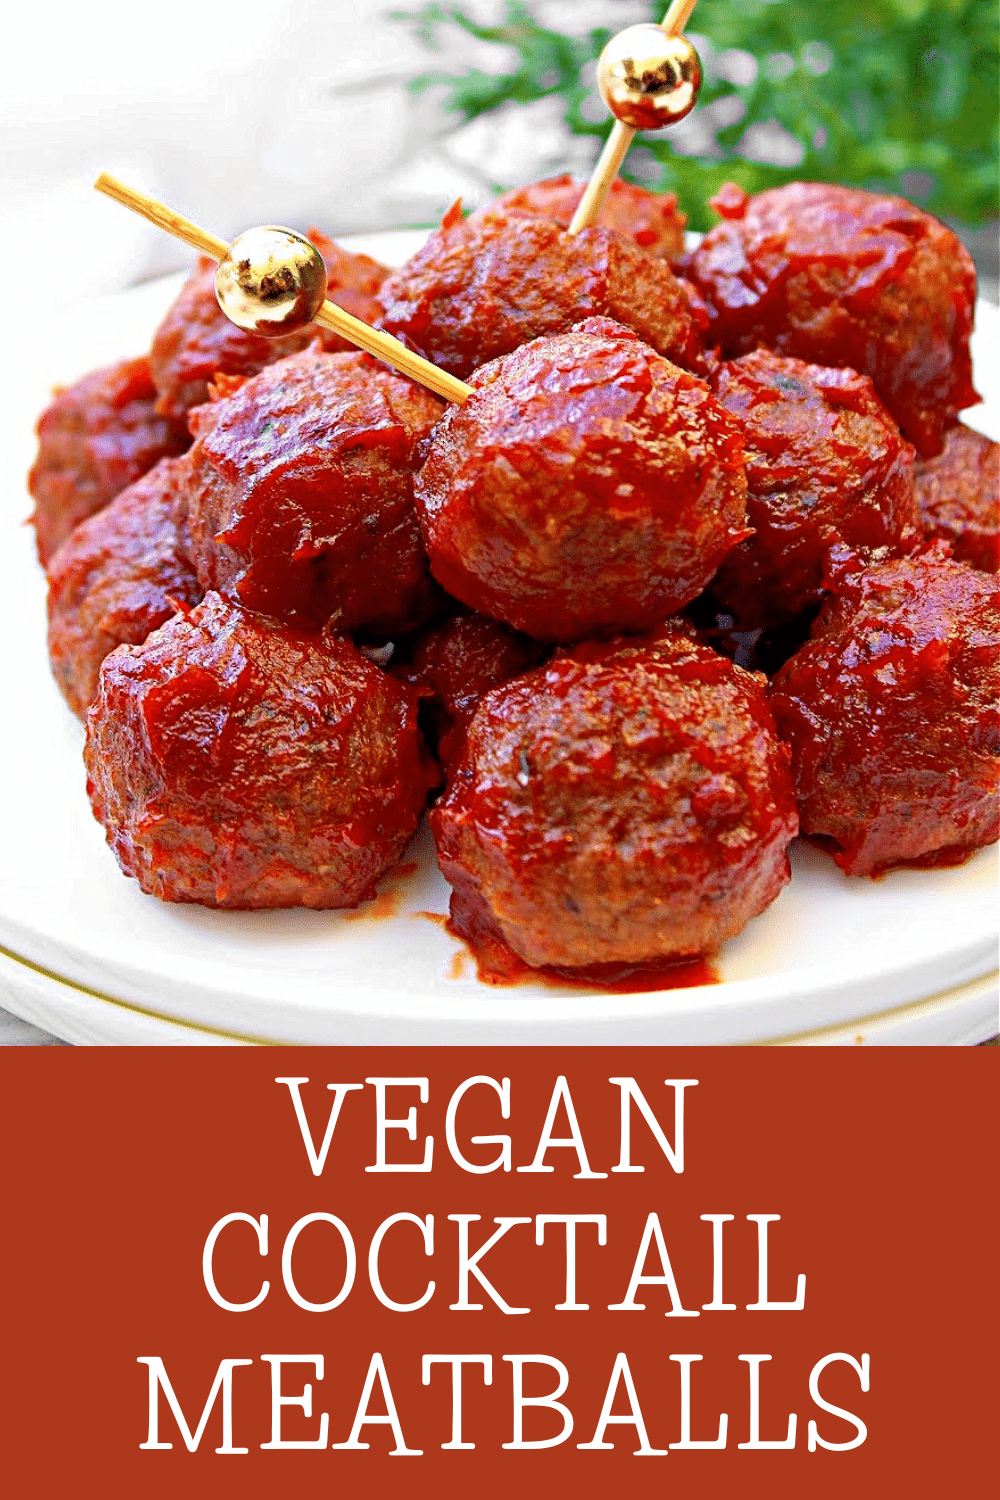 Vegan Cocktail Meatballs ~ Savory bite-sized and plant-based meatballs, perfect for the holiday season! Stovetop and slow cooker options. via @thiswifecooks